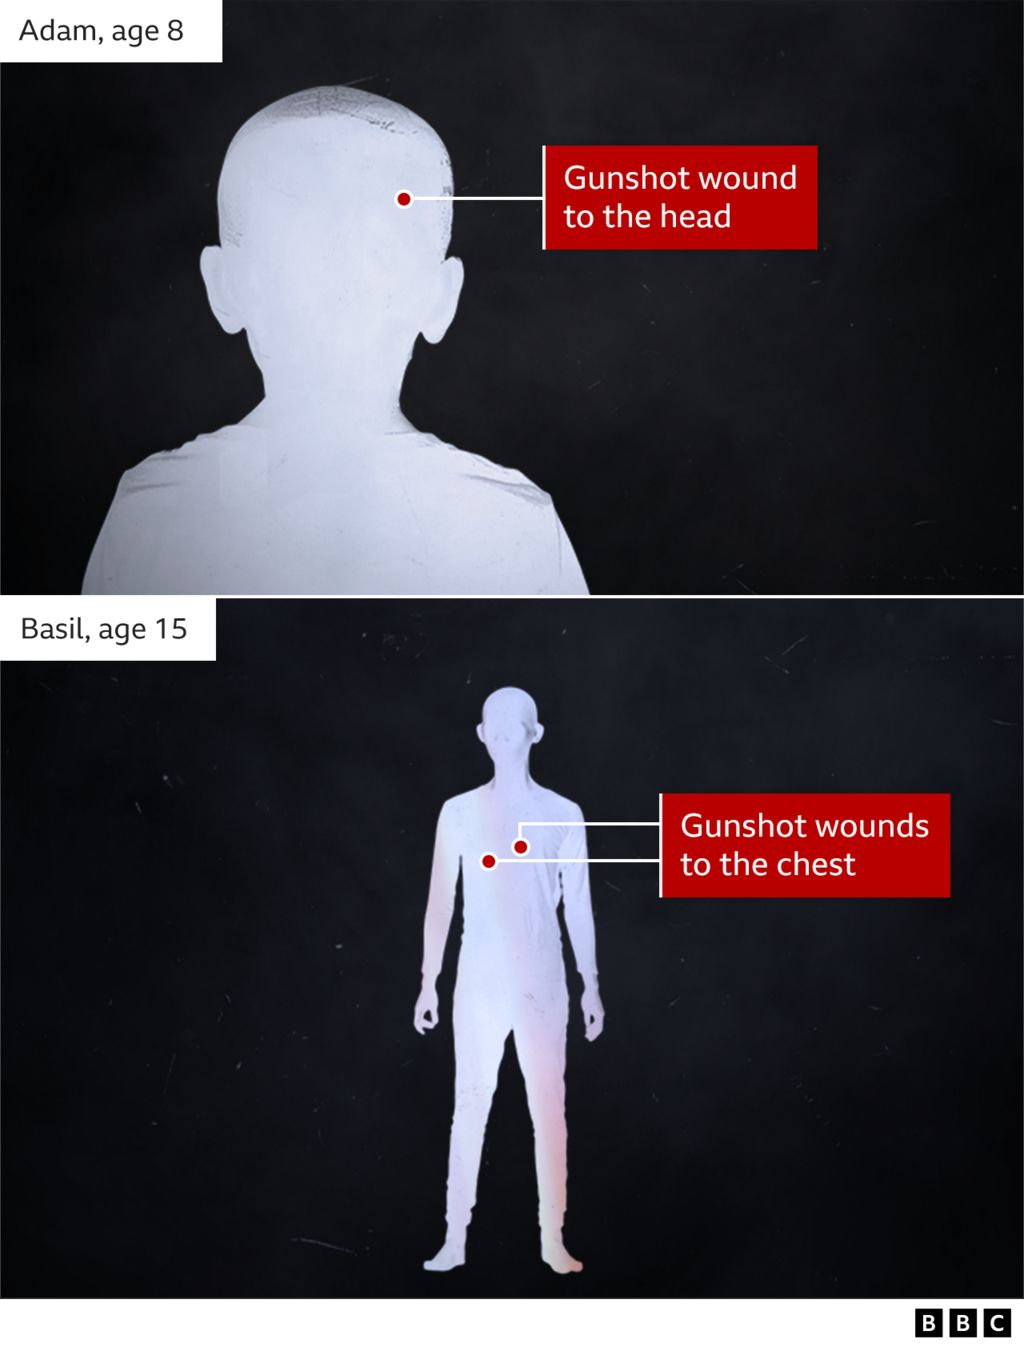 Graphic showing where Adam and Basil were hit by gunshots